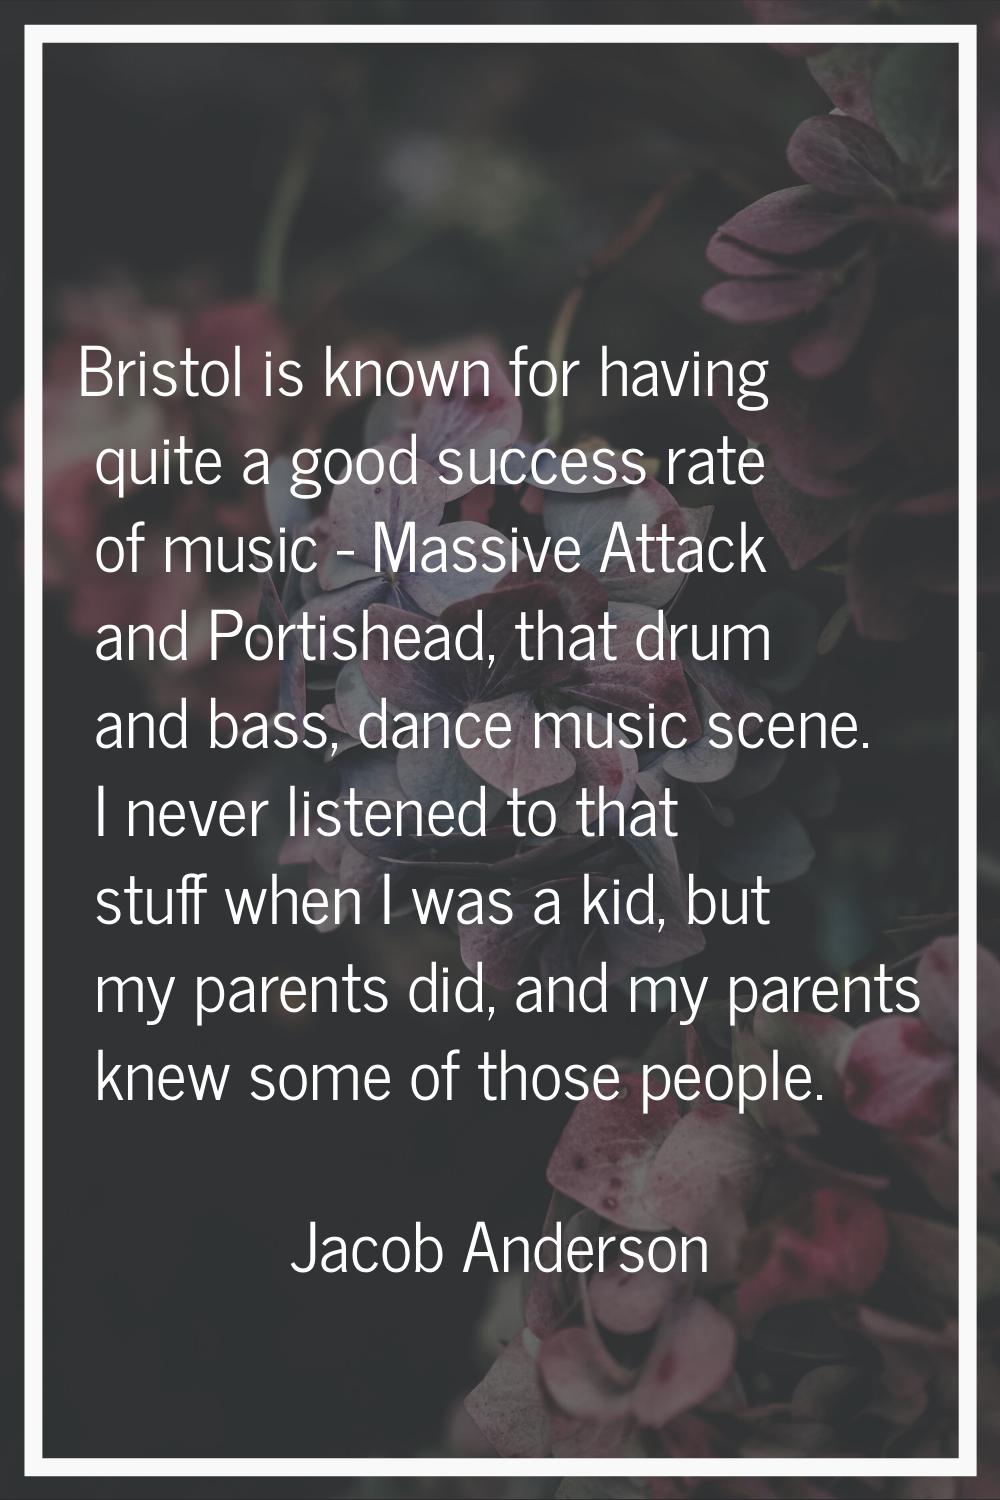 Bristol is known for having quite a good success rate of music - Massive Attack and Portishead, tha